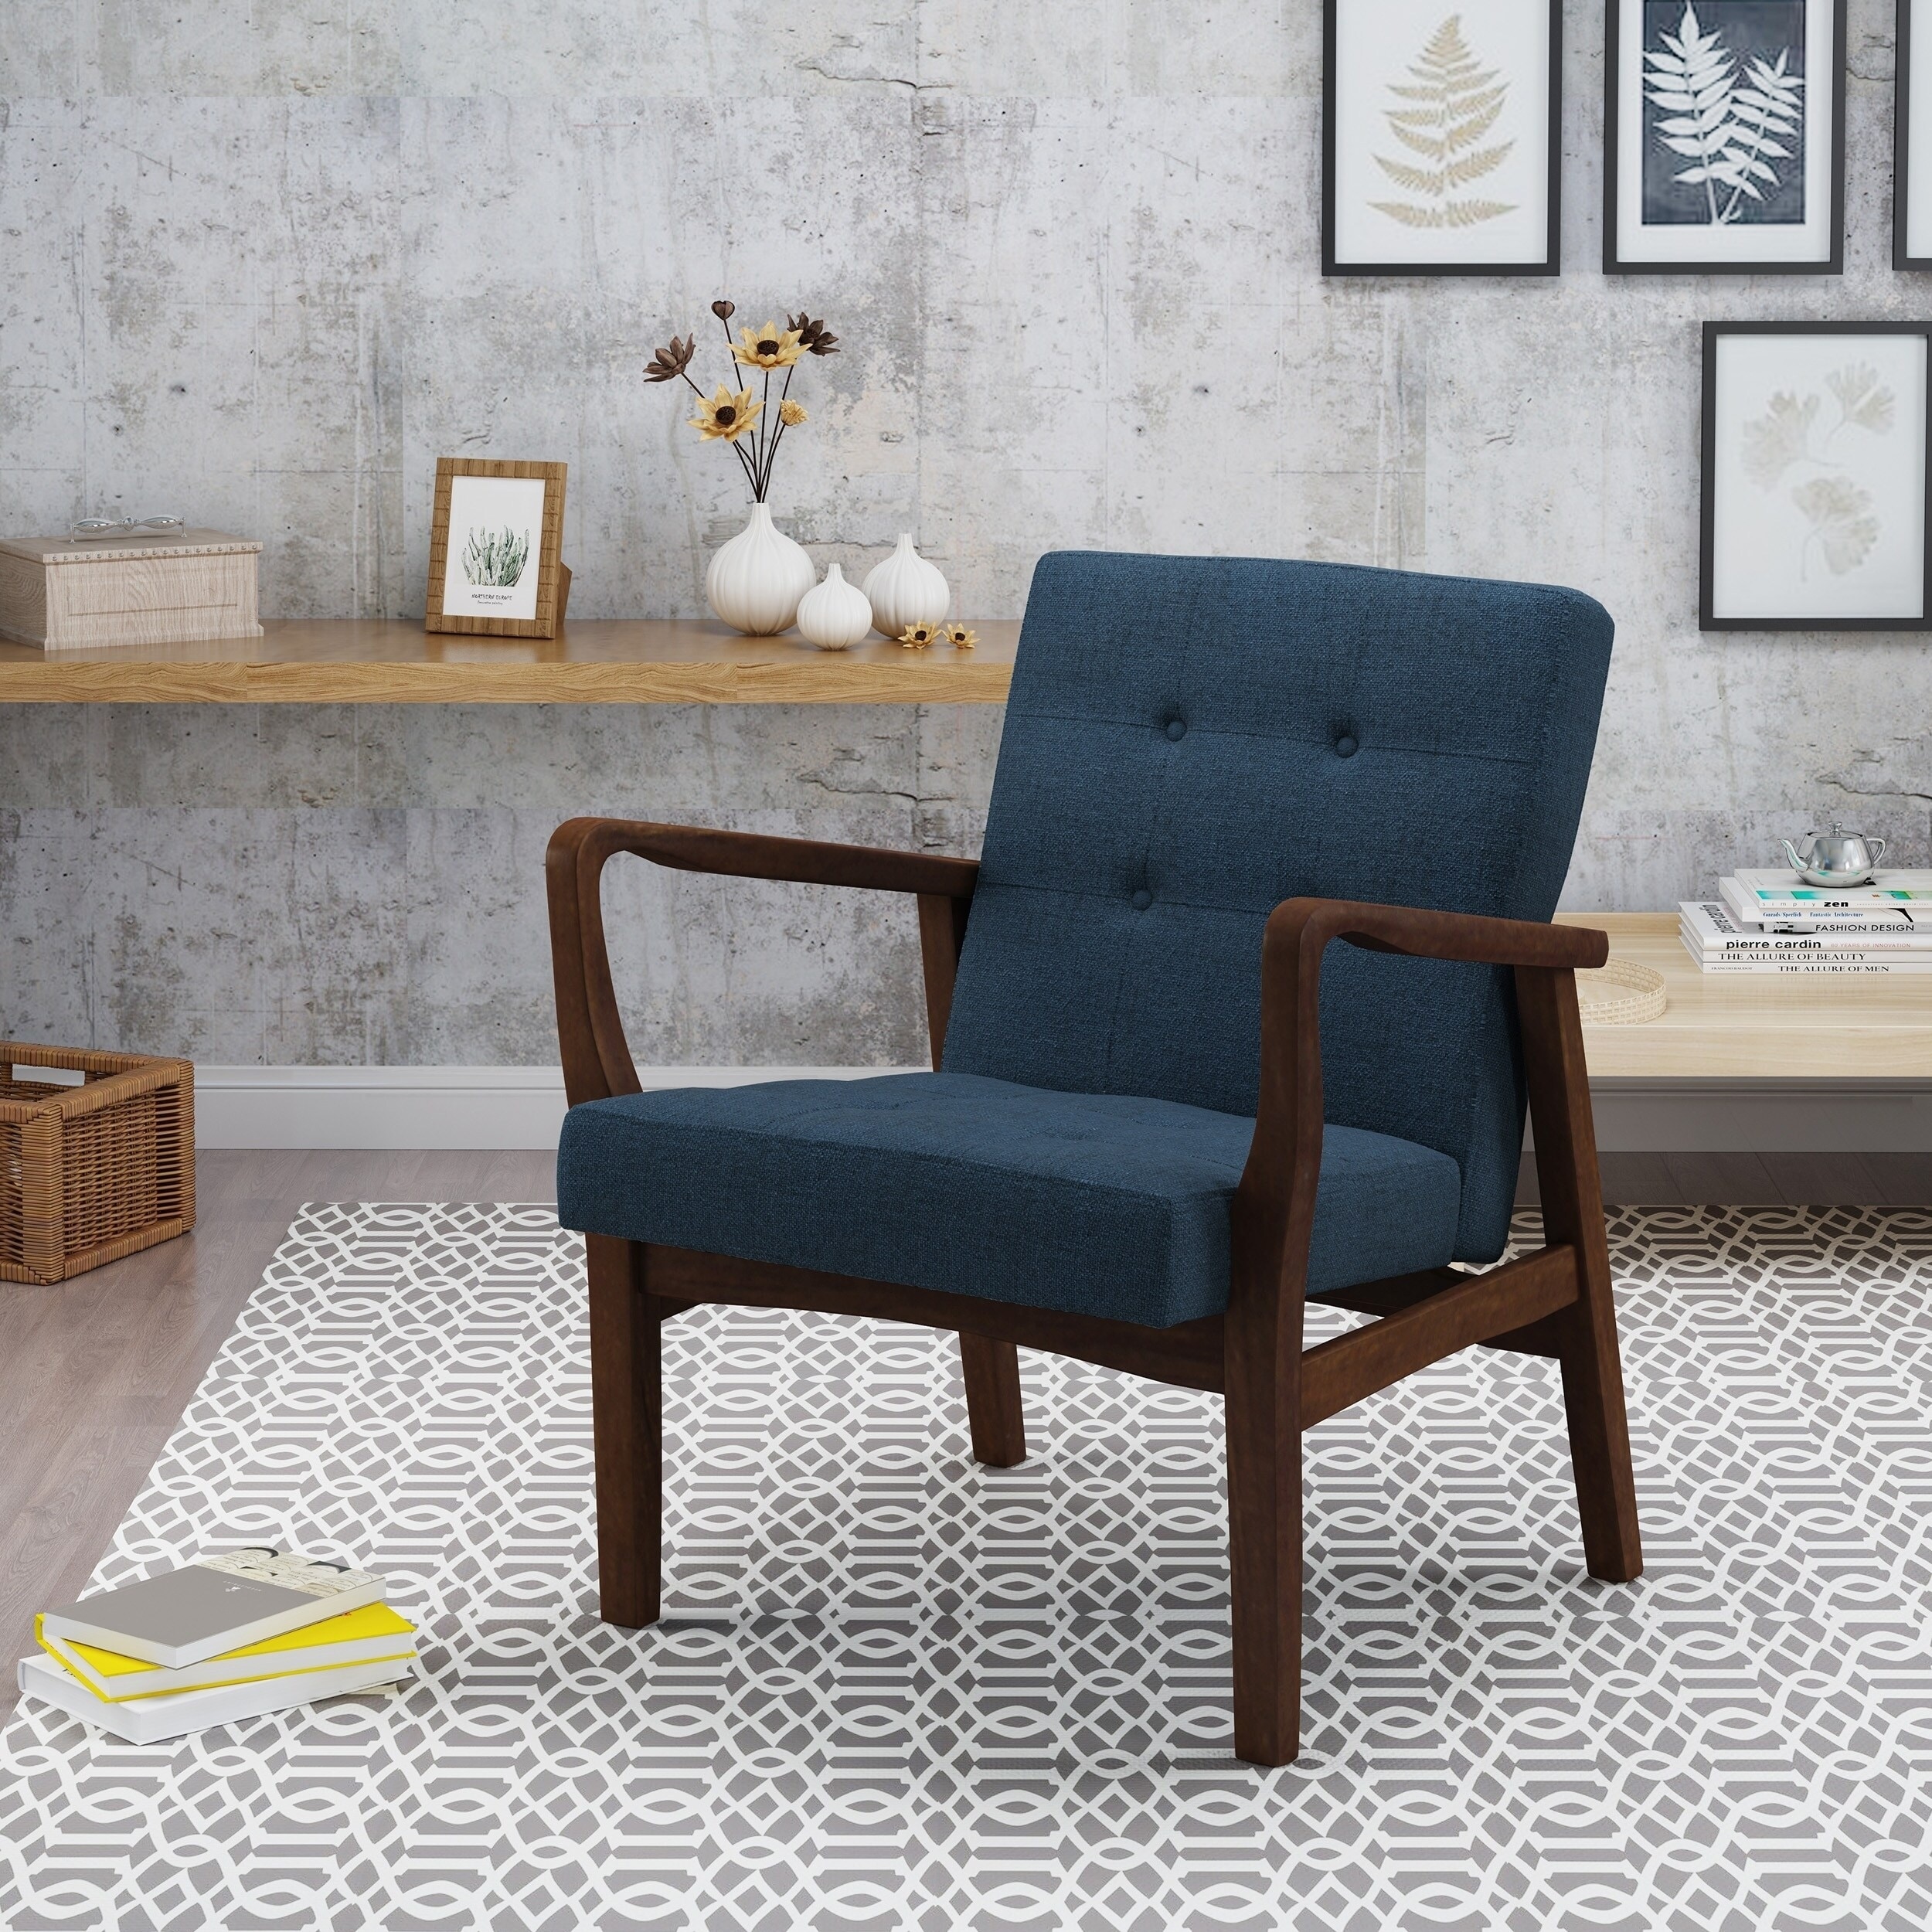 https://ak1.ostkcdn.com/images/products/is/images/direct/e207c80ae549d1be8d33ba31c8650cd7aecdfad4/Brayden-Mid-Century-Fabric-Club-Chair-by-Christopher-Knight-Home.jpg